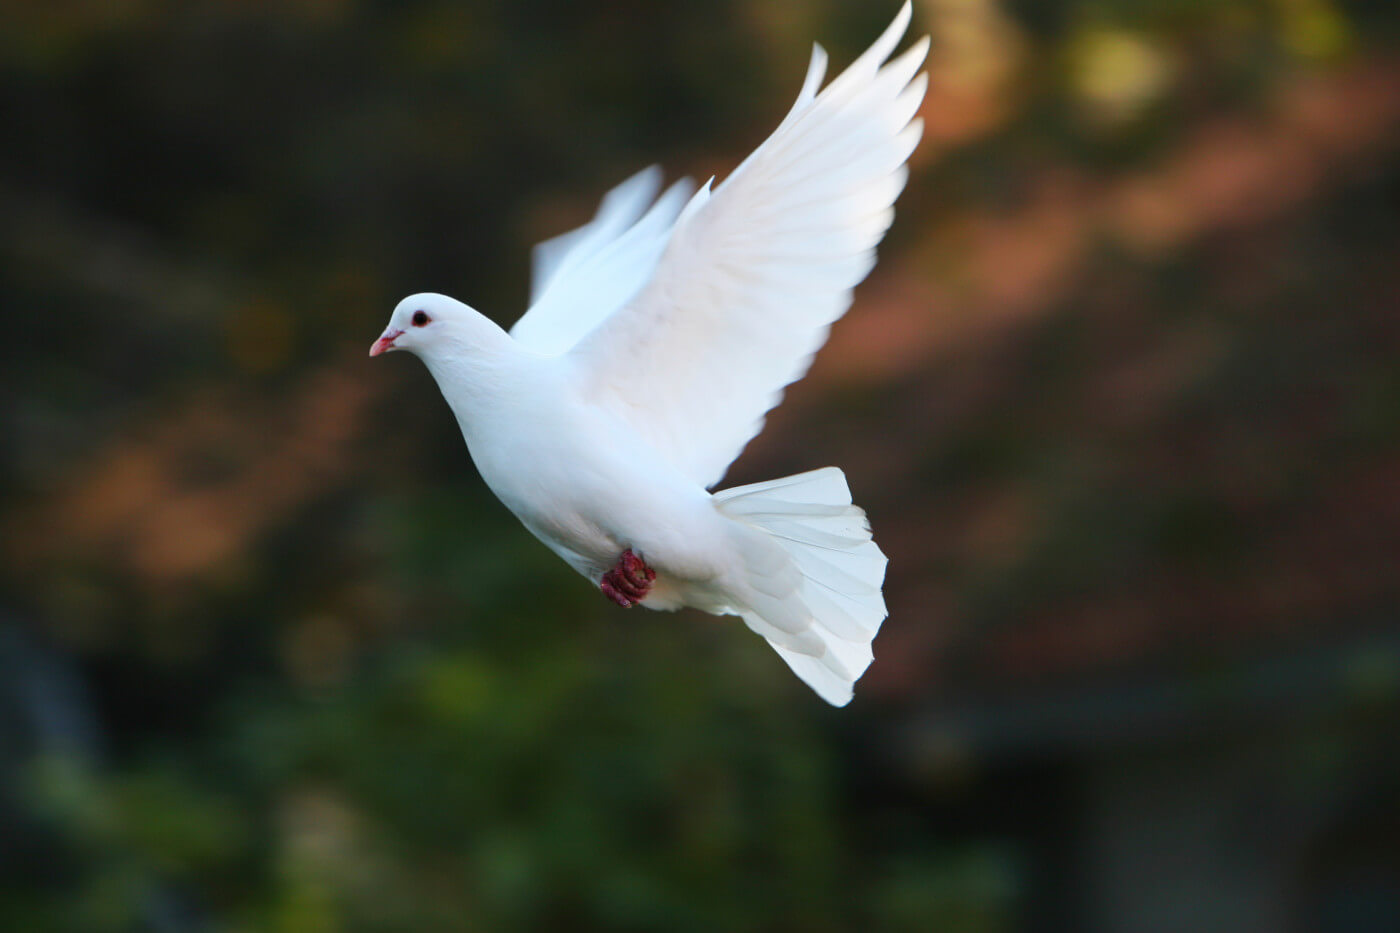 ANIMAL SYMBOLOGY: MESSAGES FROM THE DOVE